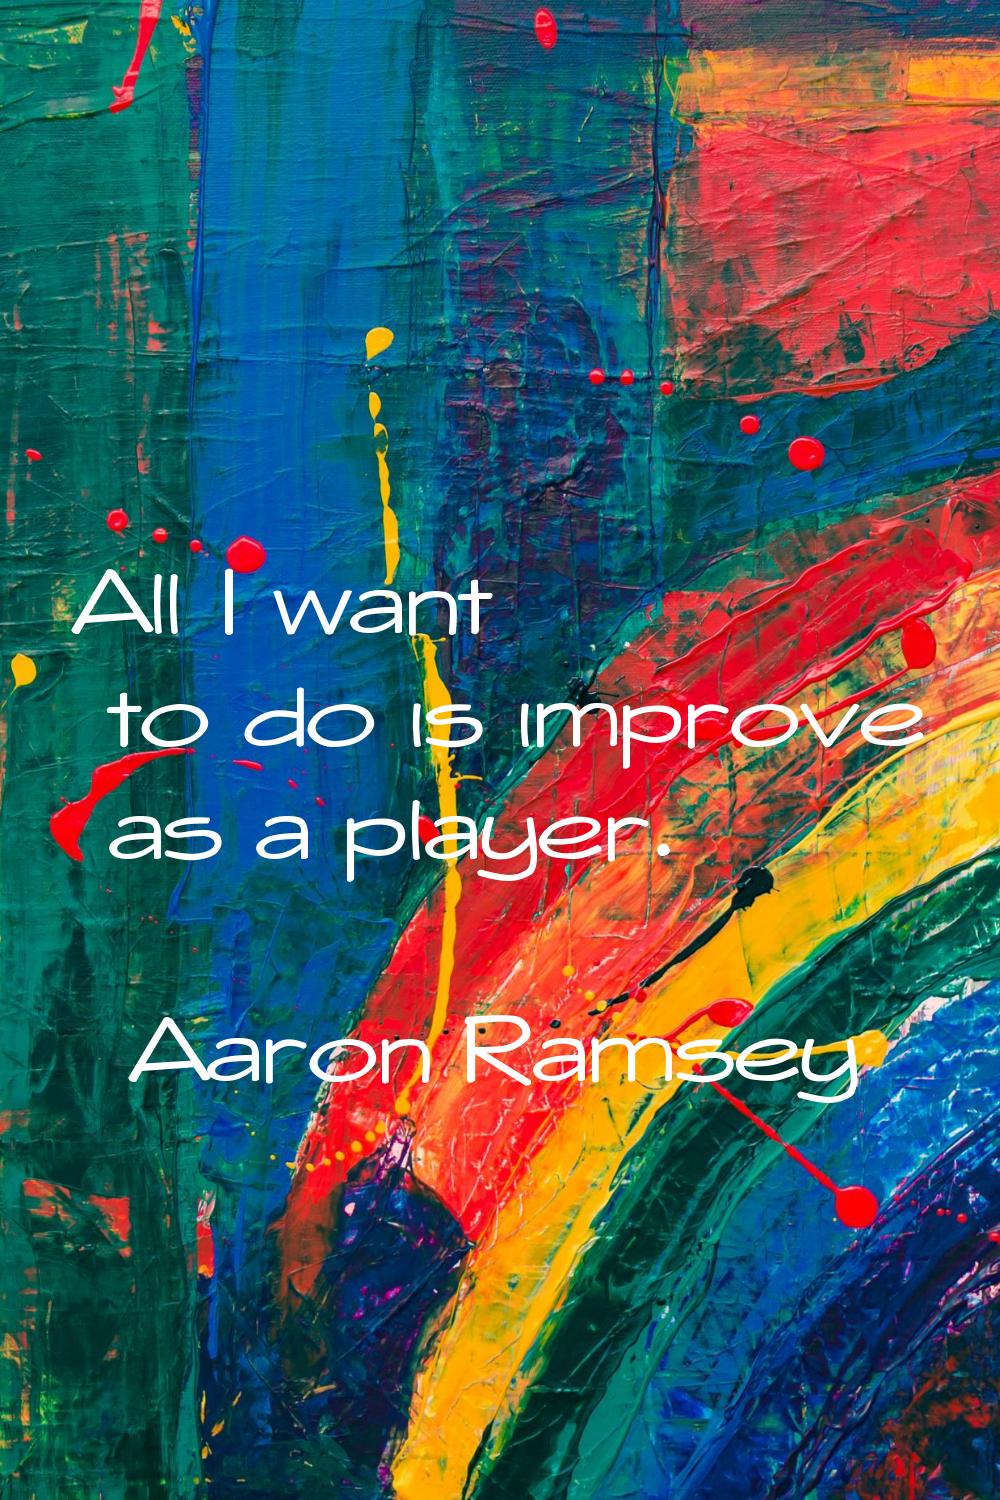 All I want to do is improve as a player.